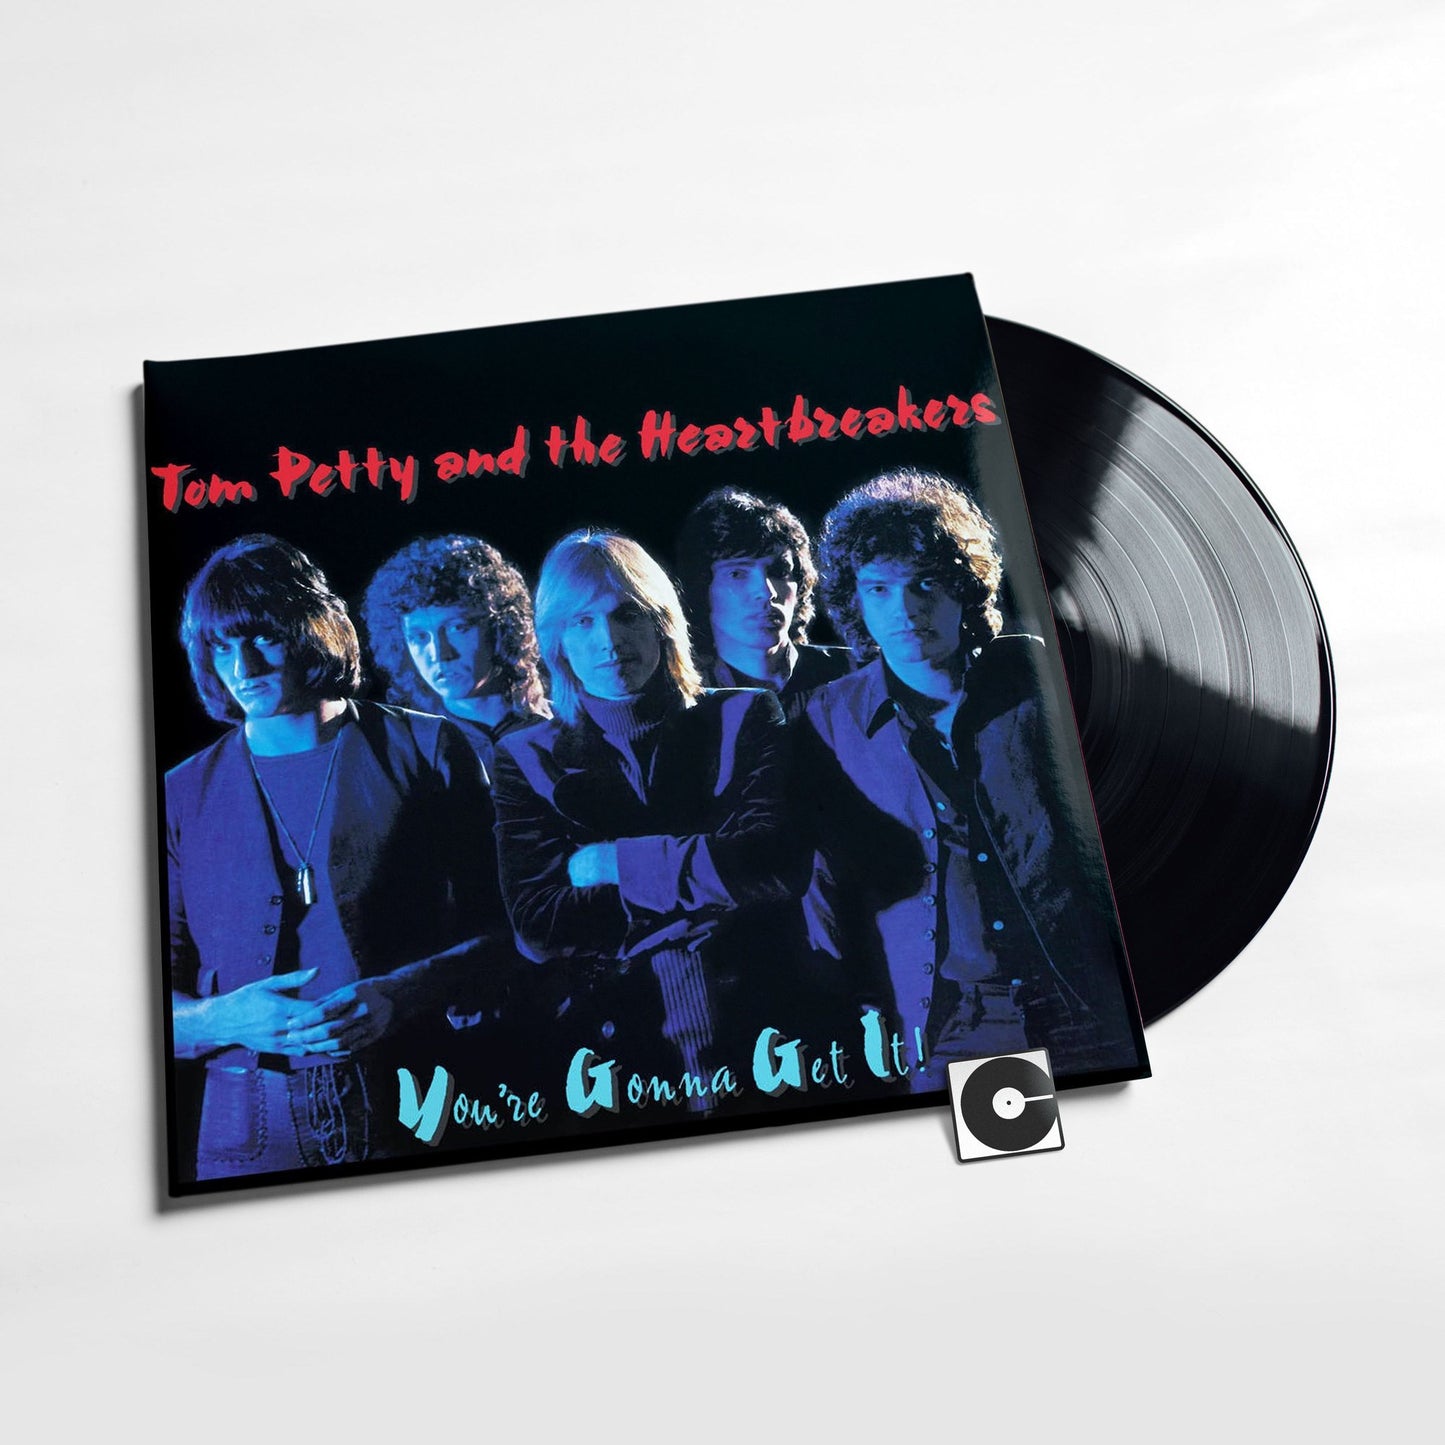 Tom Petty & The Heartbreakers - "You're Gonna Get It"